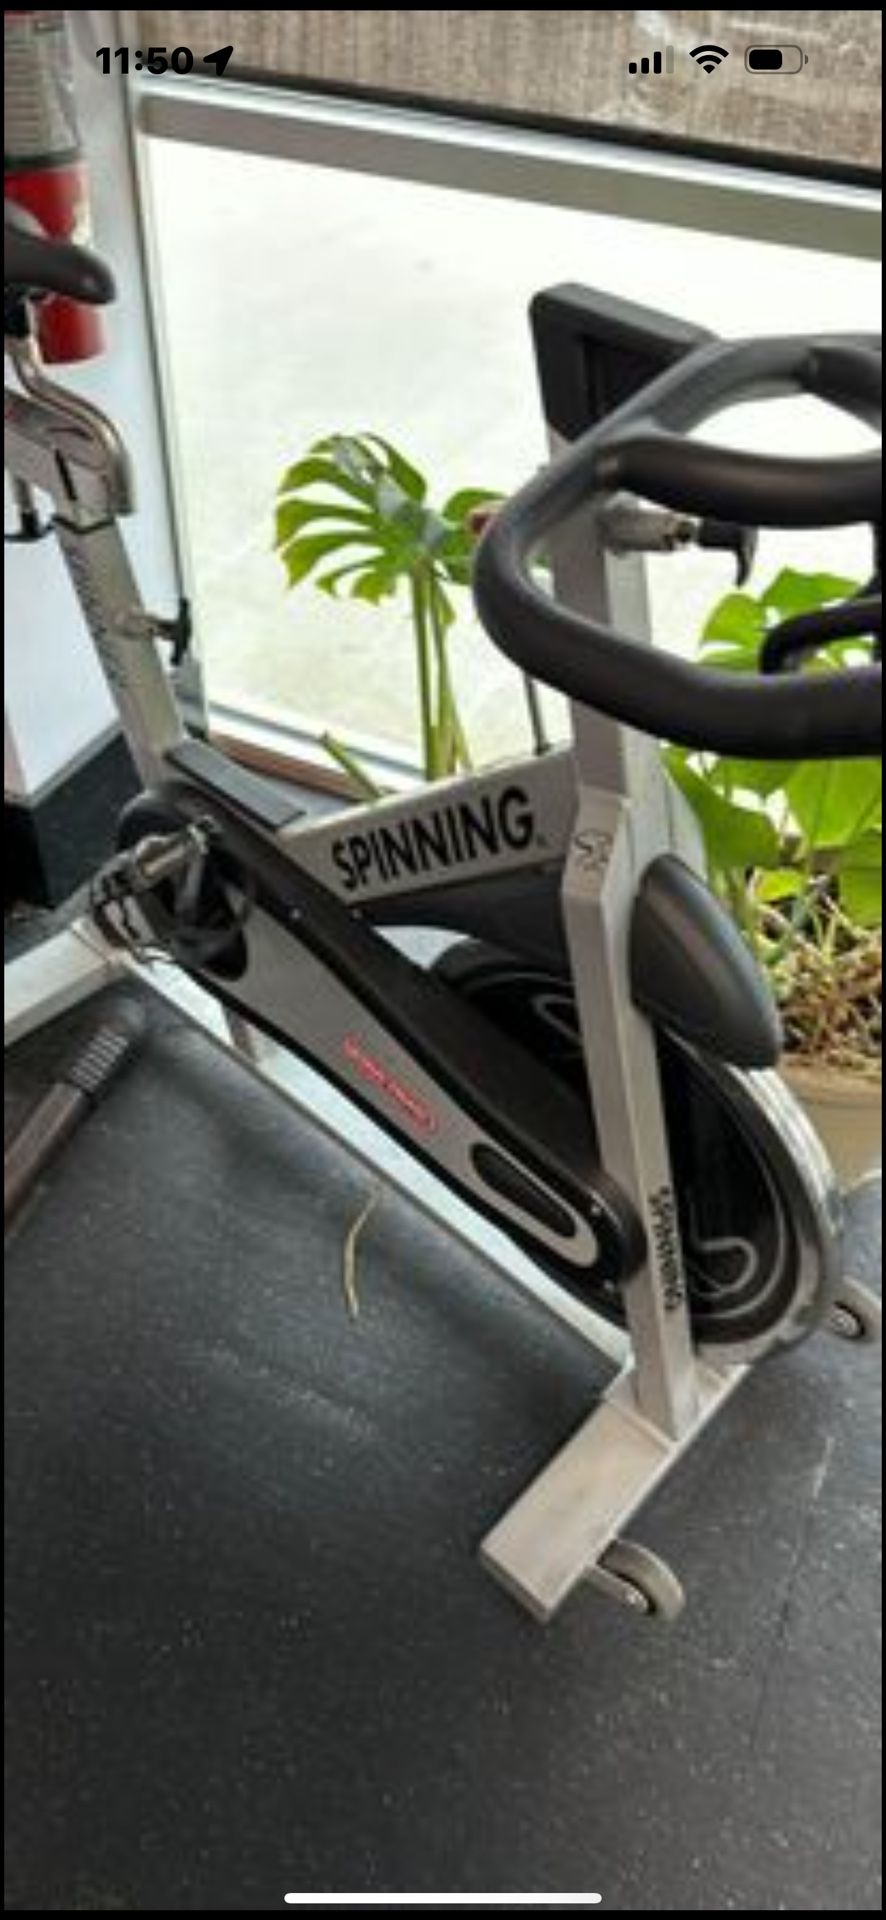 Star Trac Spinning Bicycle Cardio Fitness Workout 